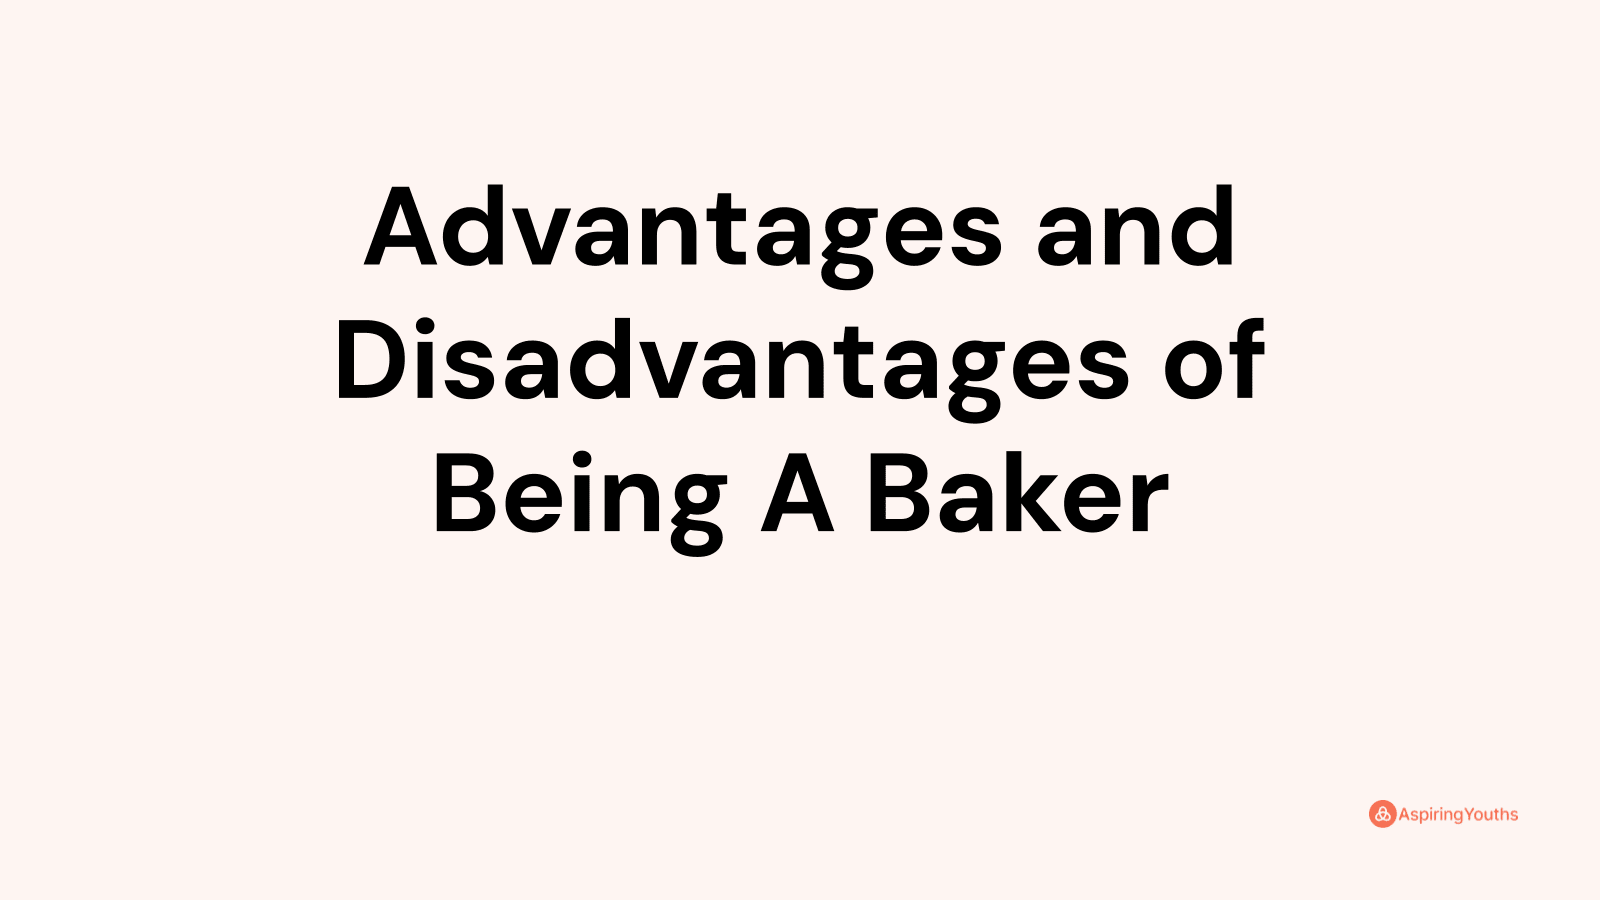 Advantages and disadvantages of Being A Baker